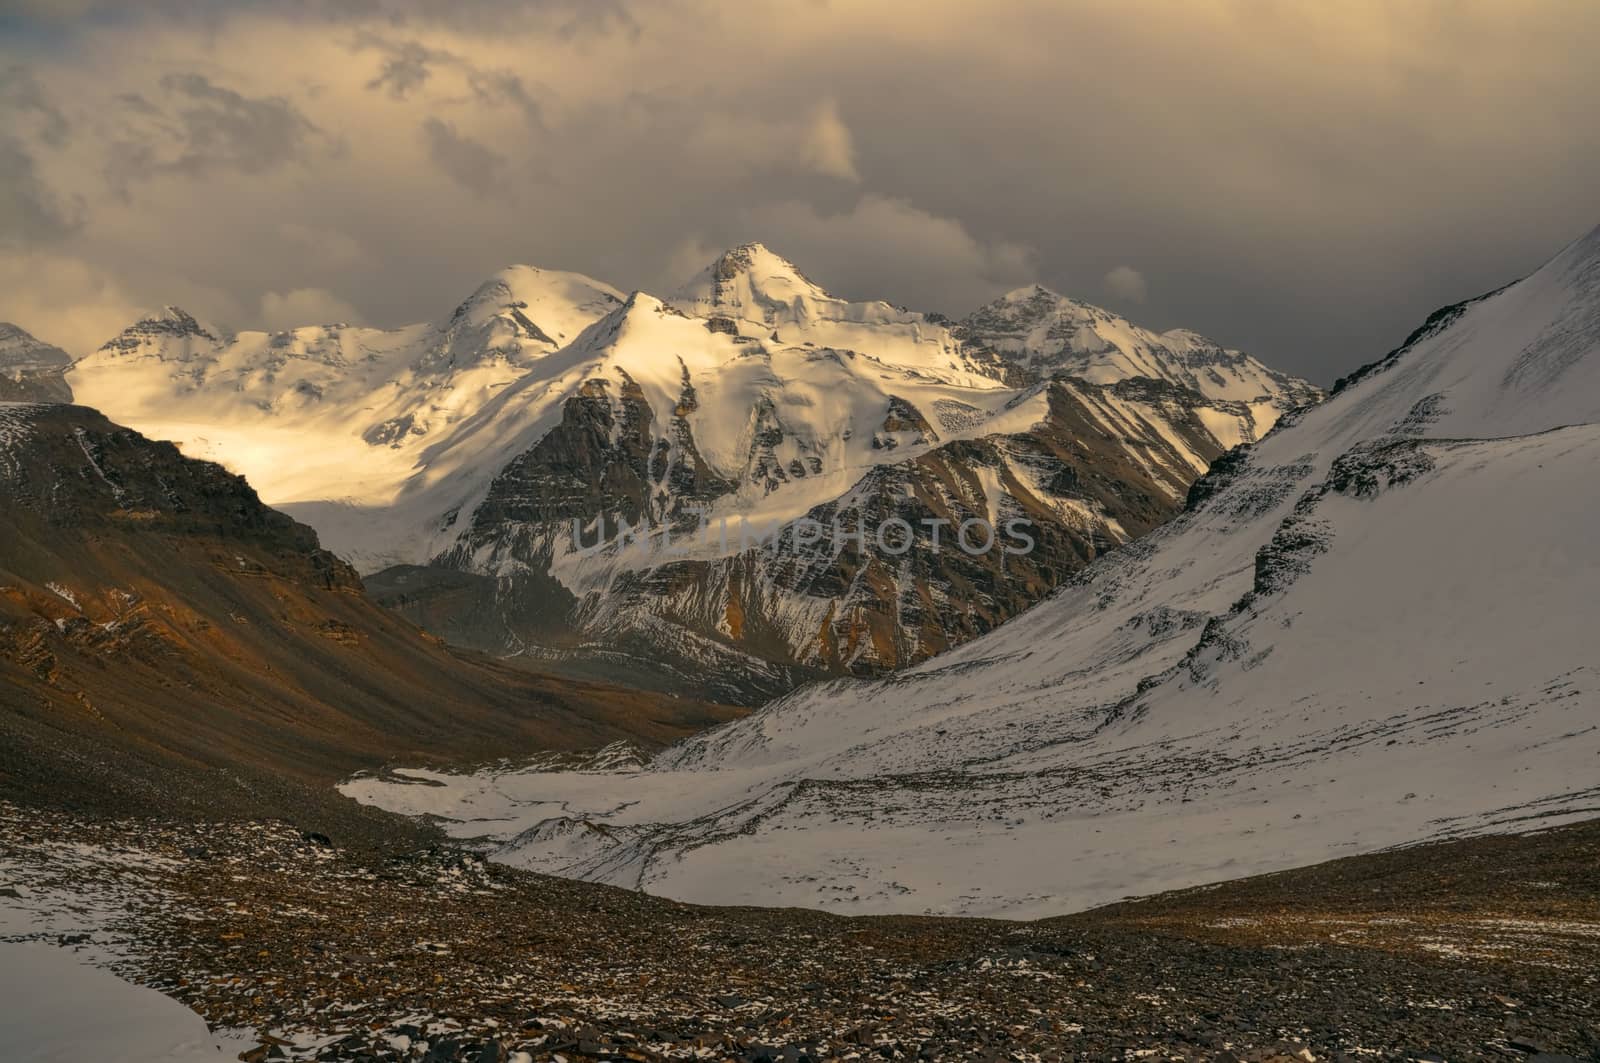 Scenic view of cloudy Wakhan valley in Tajikistan with snowy mountain peaks of Pamir and Karakoram